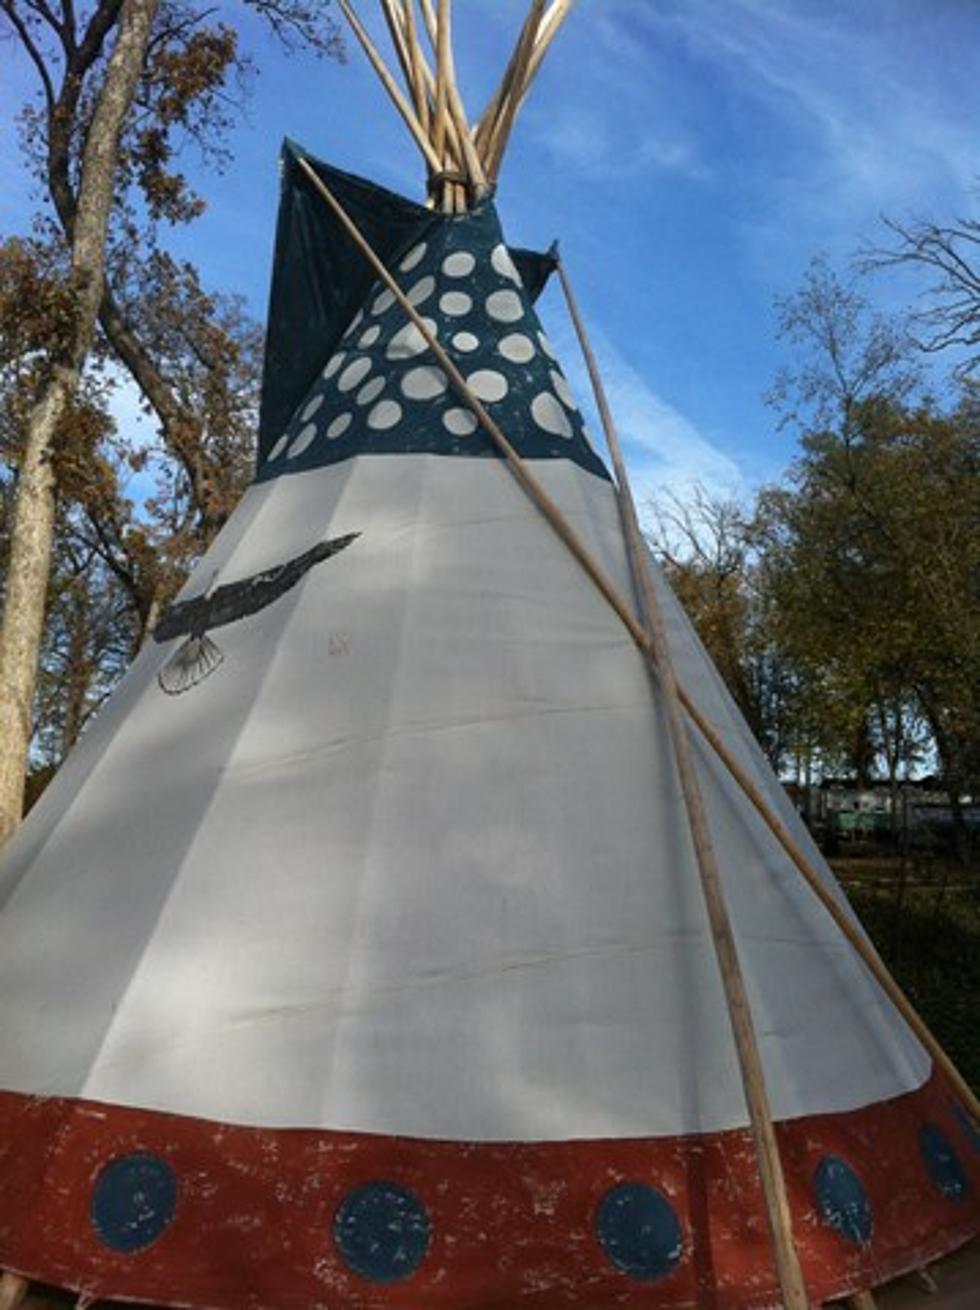 Spend the Night in a TeePee at This Campground In Lena, Illinois